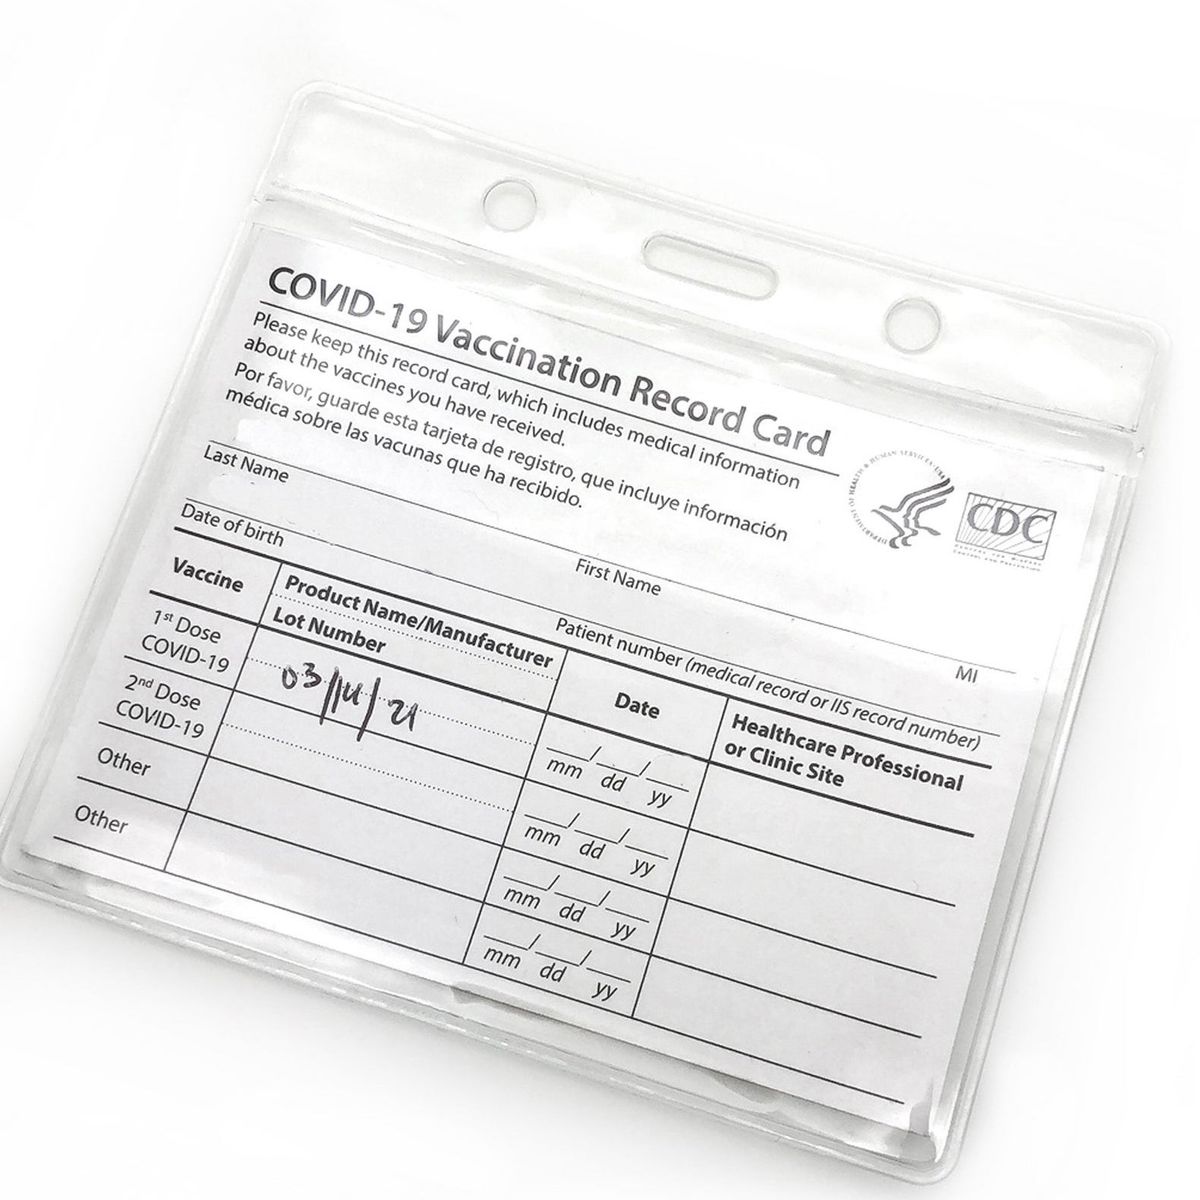 Leather Vaccinated Card Protective Sleeve for Standard COVID Vaccination Kit Record Cards CDC Vaccine Card Holder 4x3 Inches 